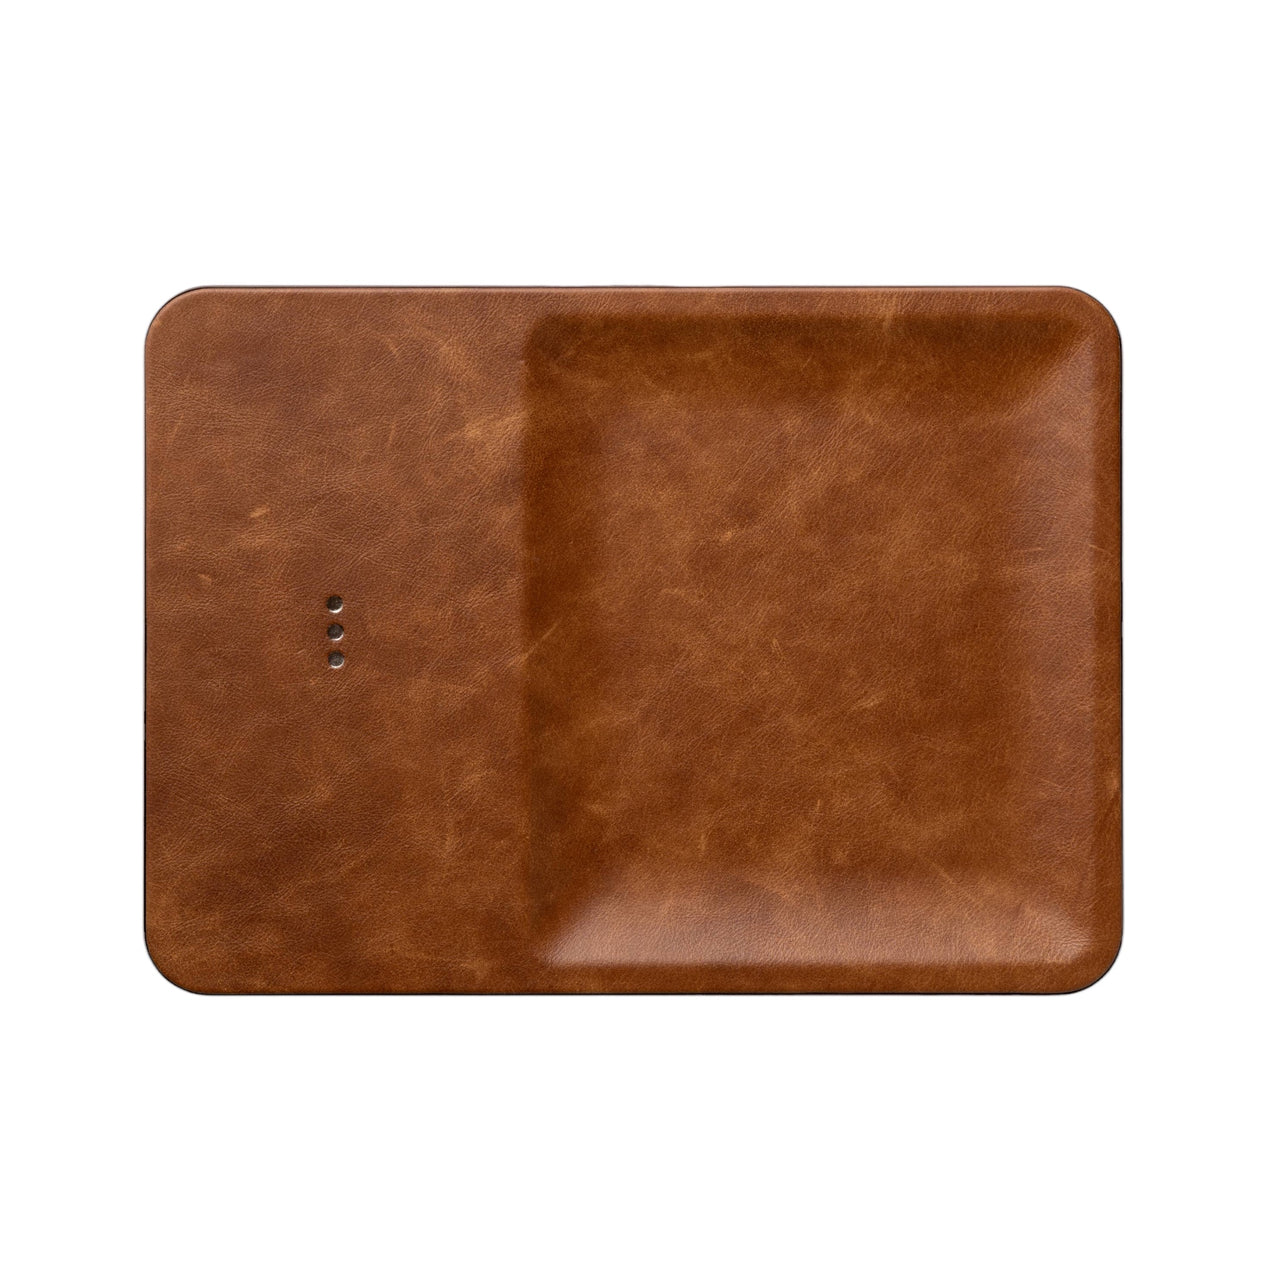 Catch 3 | Saddle Leather Wireless Charger with Valet Tray